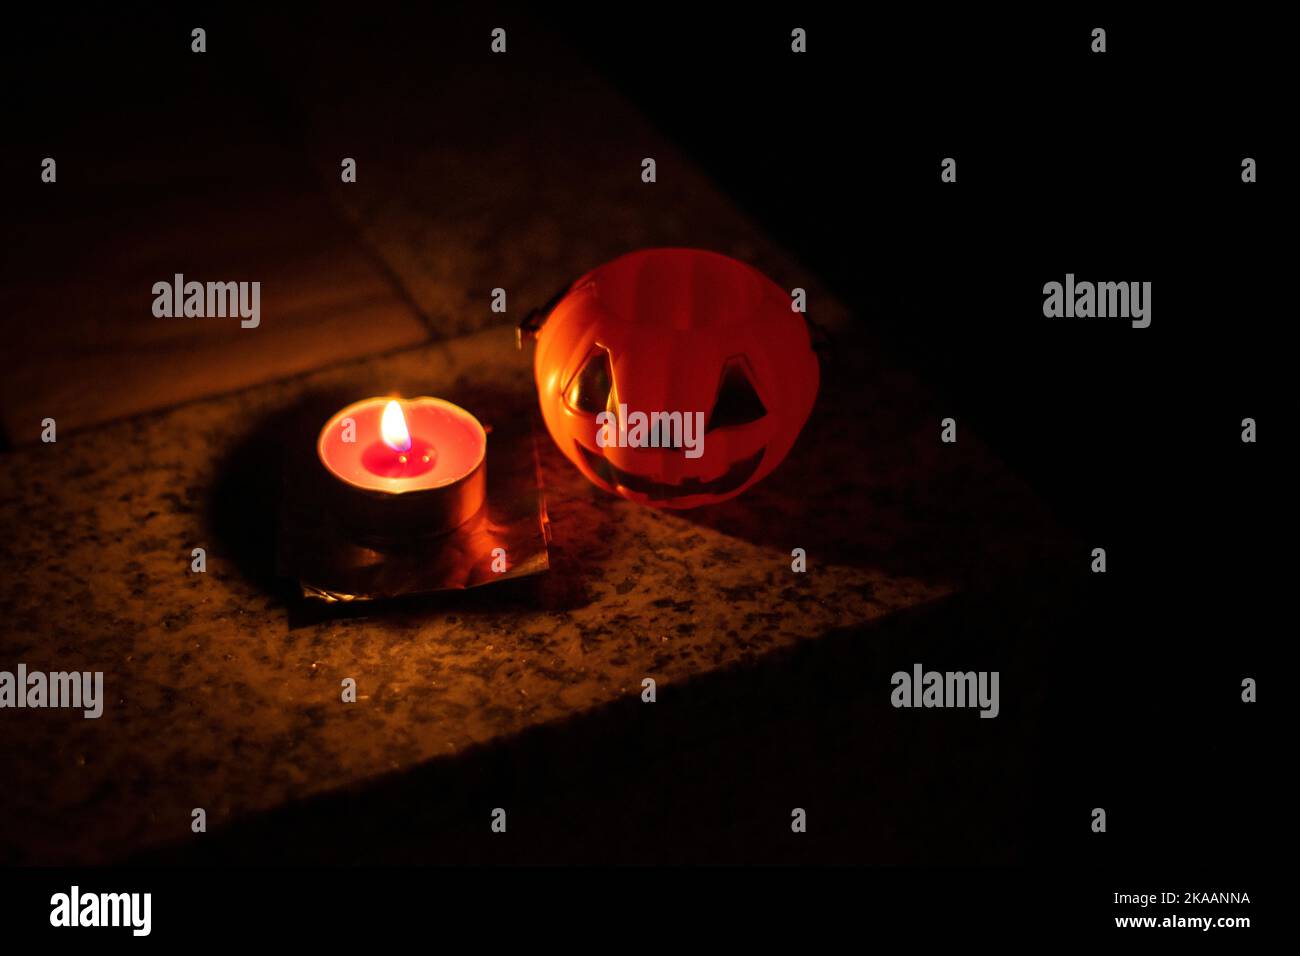 Halloween pumpkin horror mood and scary ambience Stock Photo